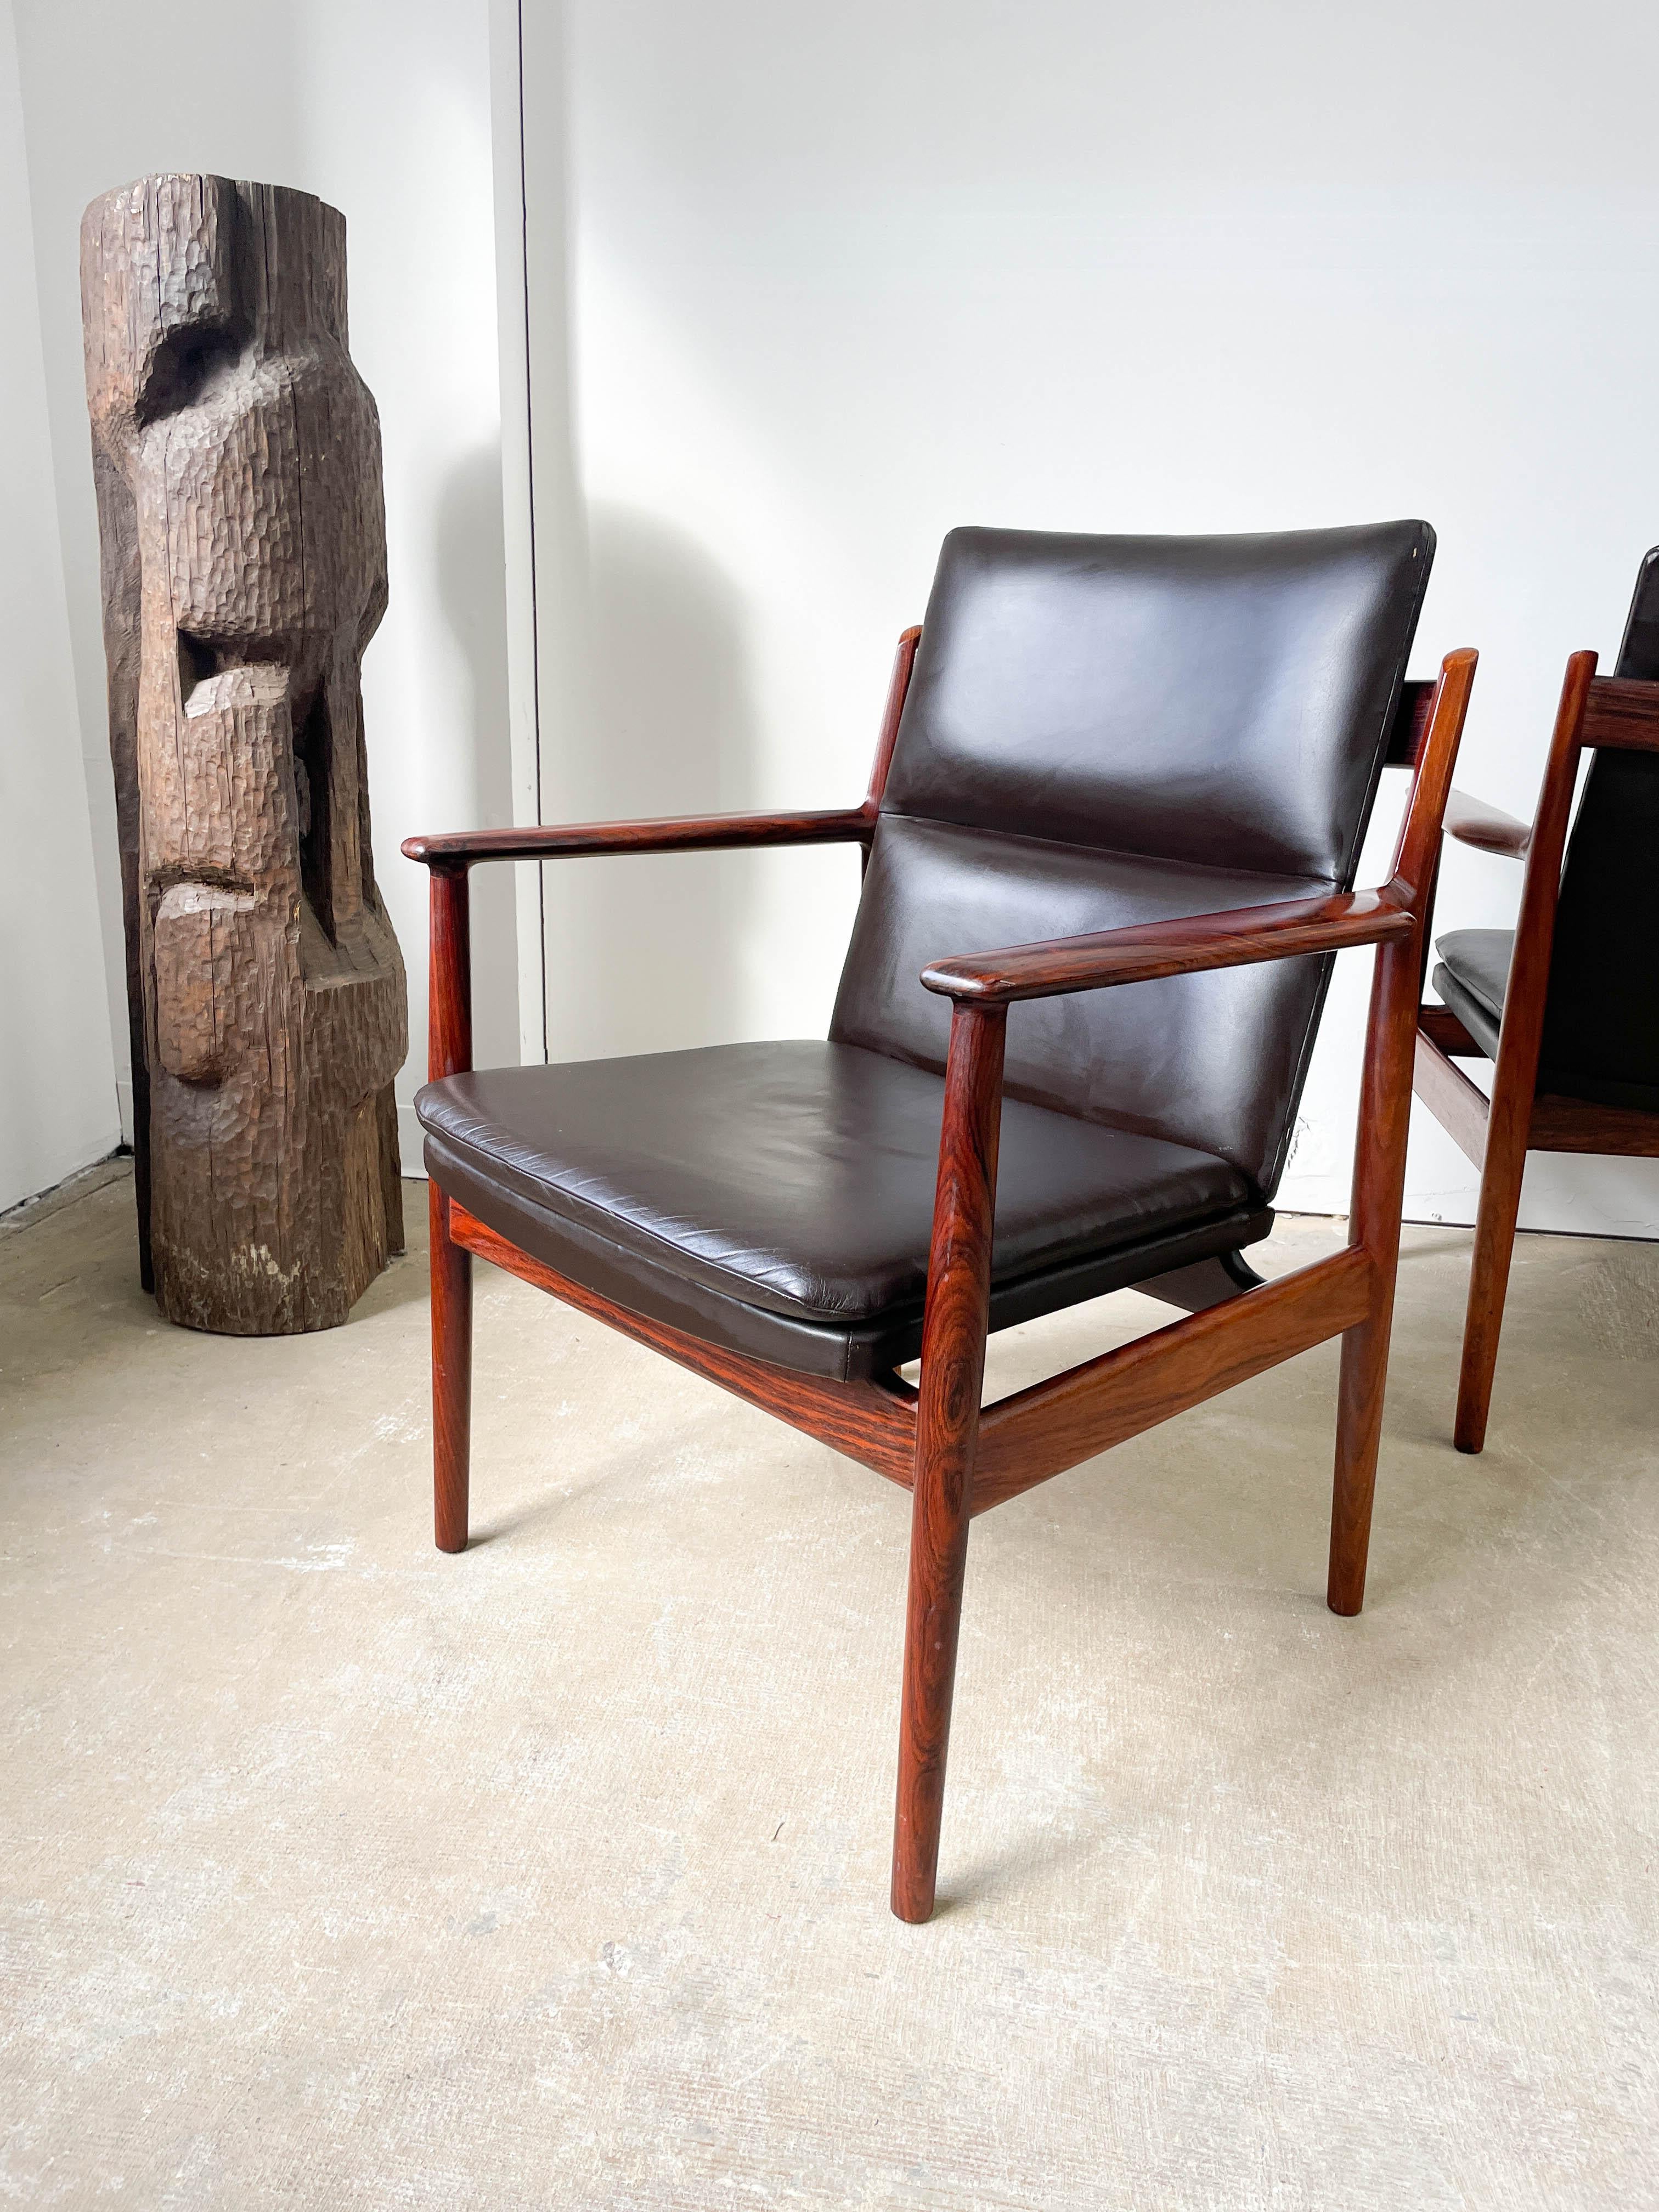 Set of 4 Arne Vodder Rosewood Armchairs Model 431 In Good Condition For Sale In Kalamazoo, MI